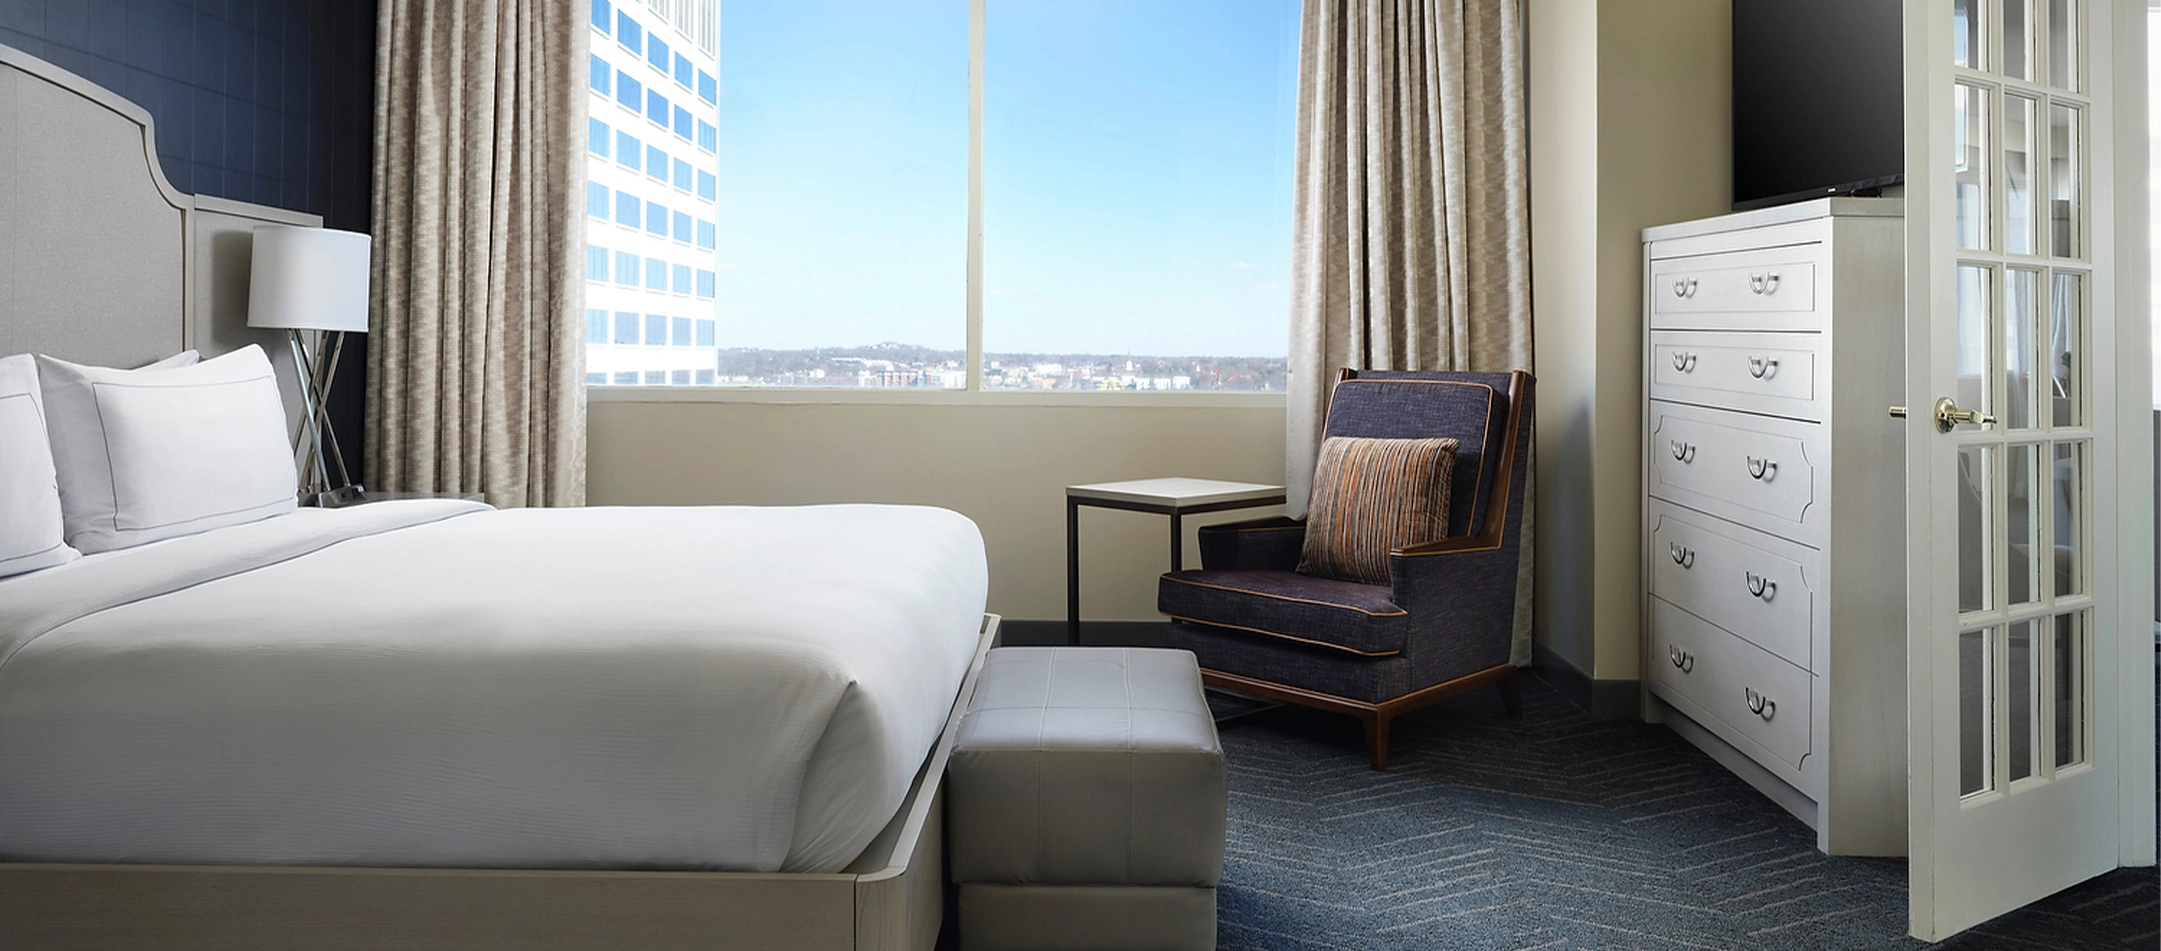 interior view of DoubleTree by Hilton Hotel Nashville Downtown bedroom